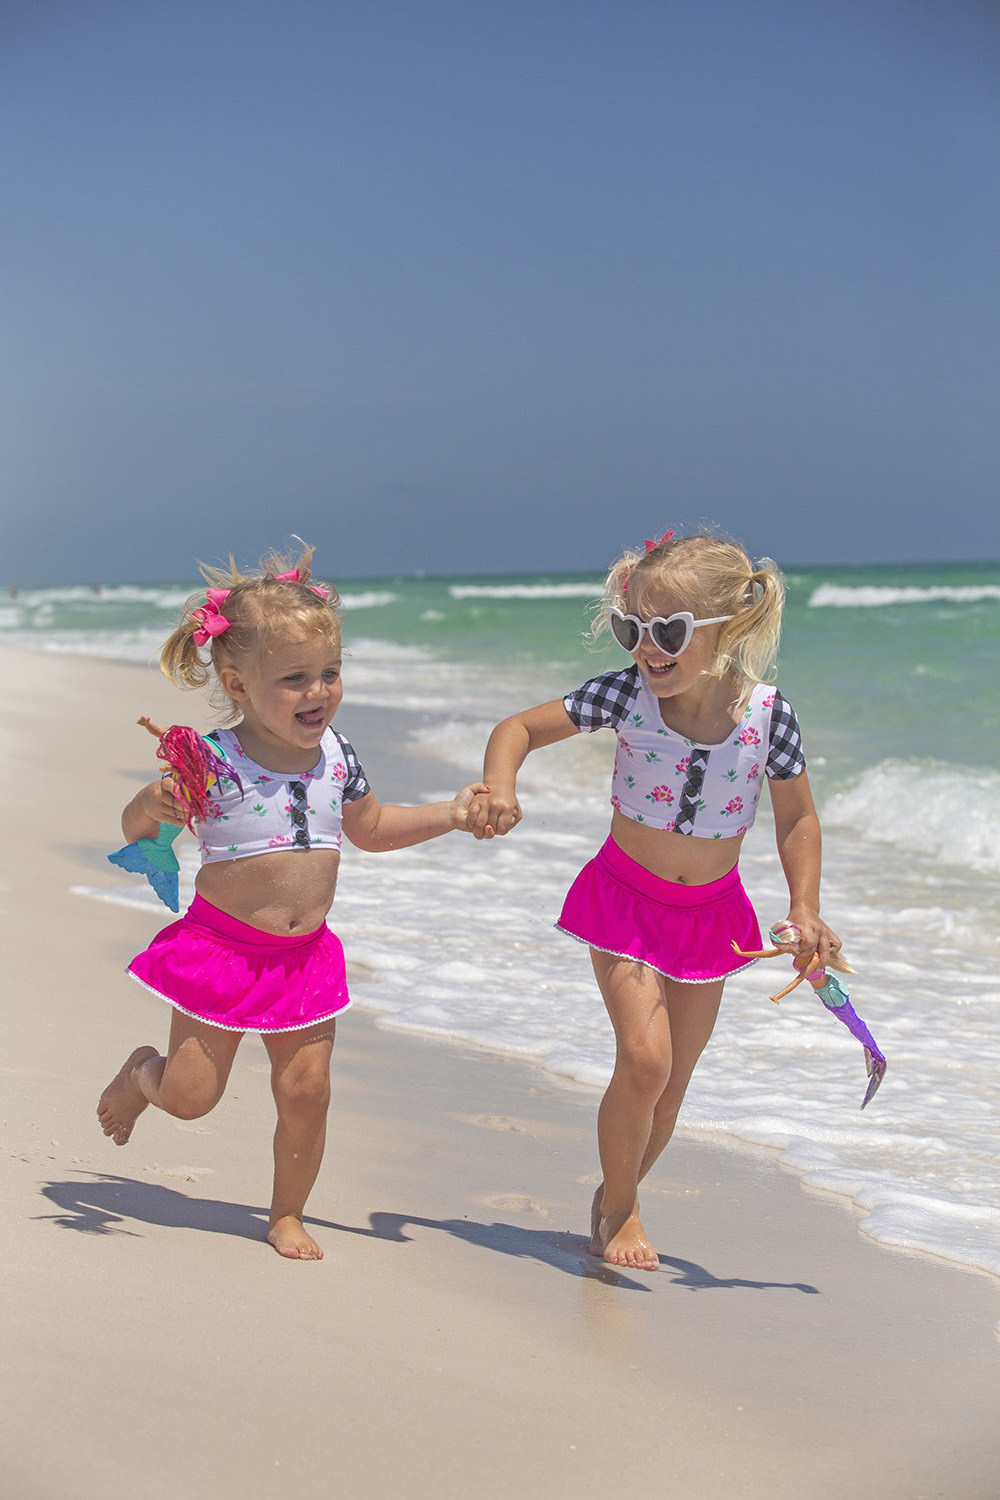 Safety Comes First This Spring Break on Pensacola Beach